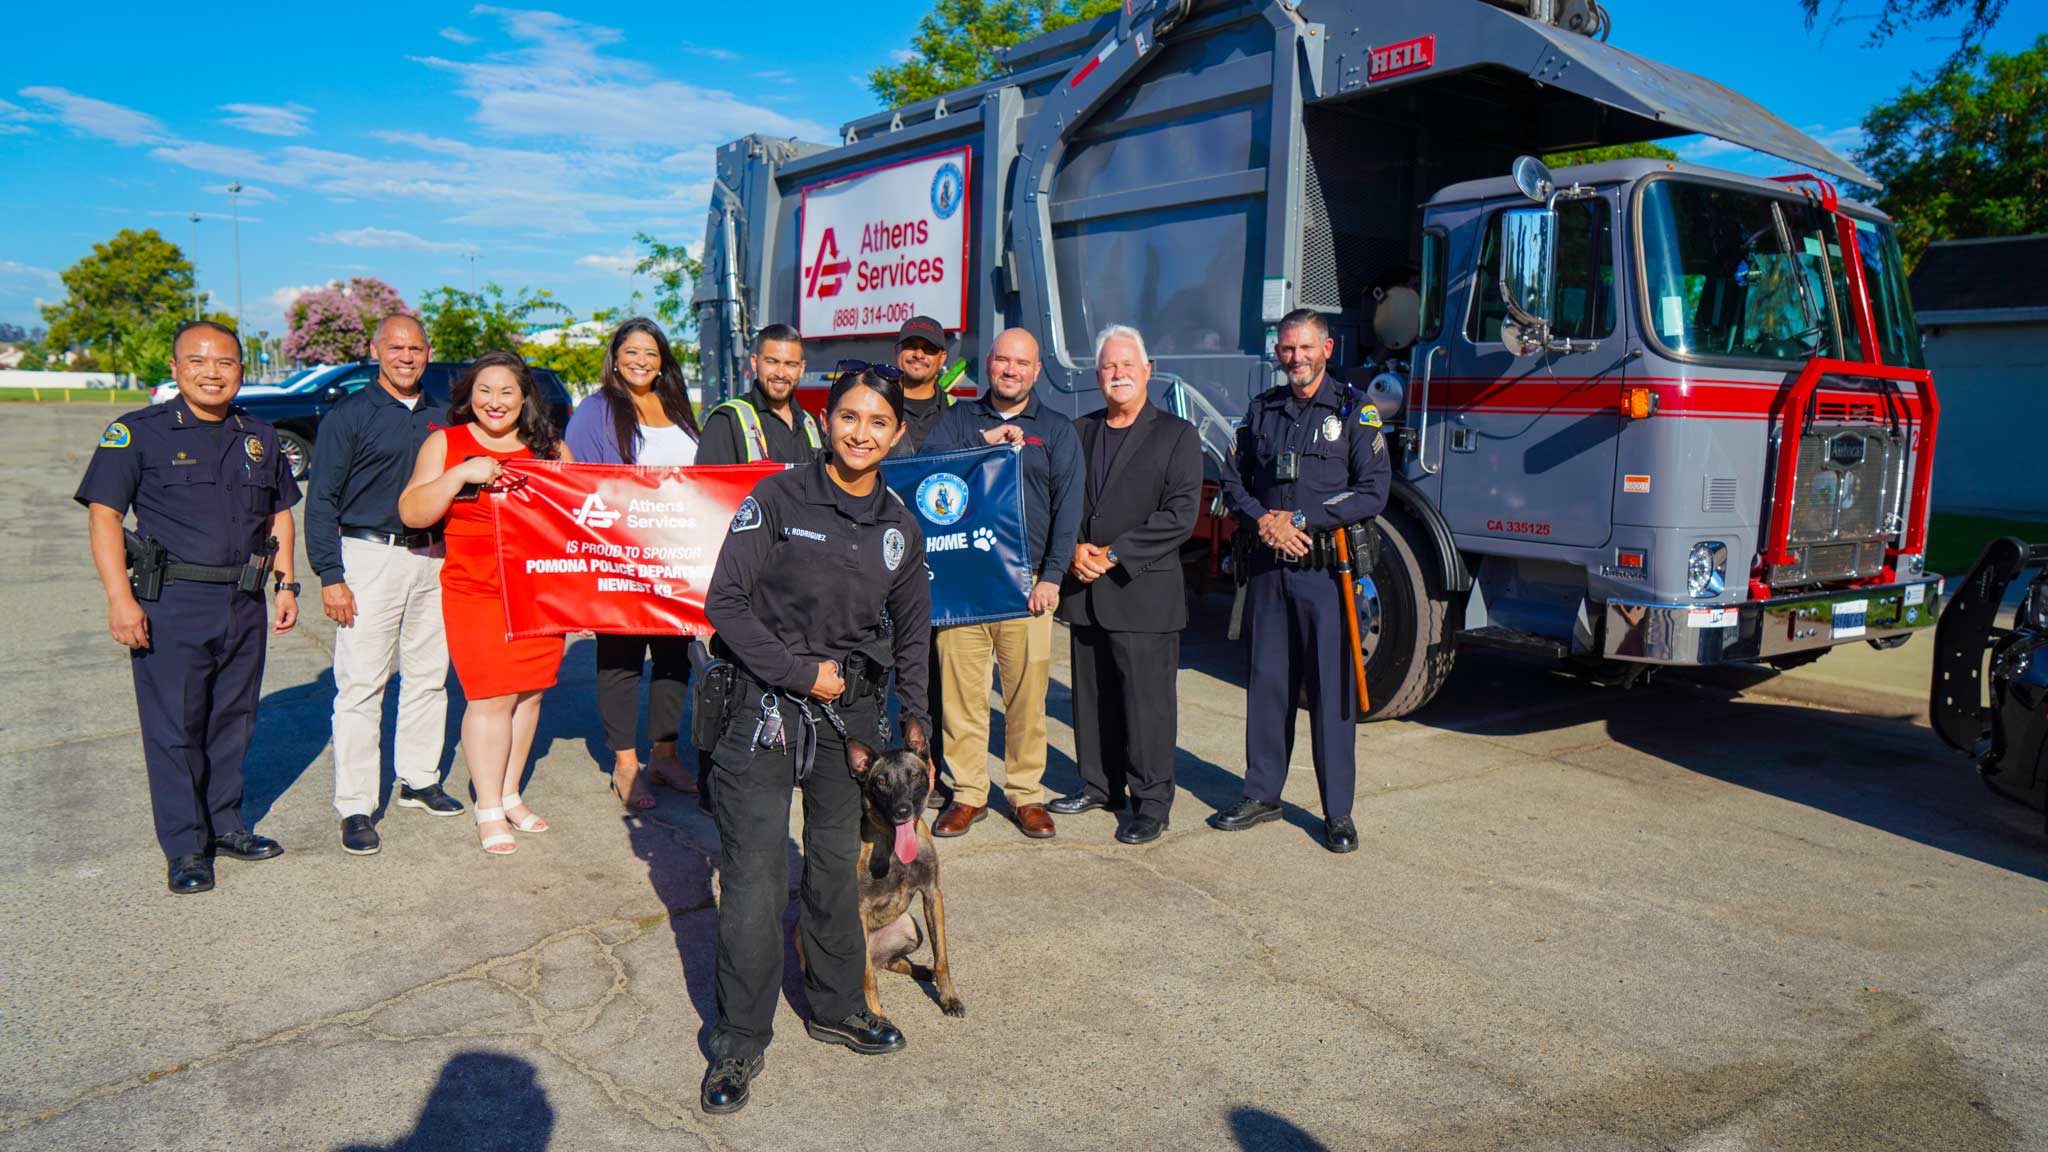 Athens Services Sponsors New K-9 Office for Pomona Police Department